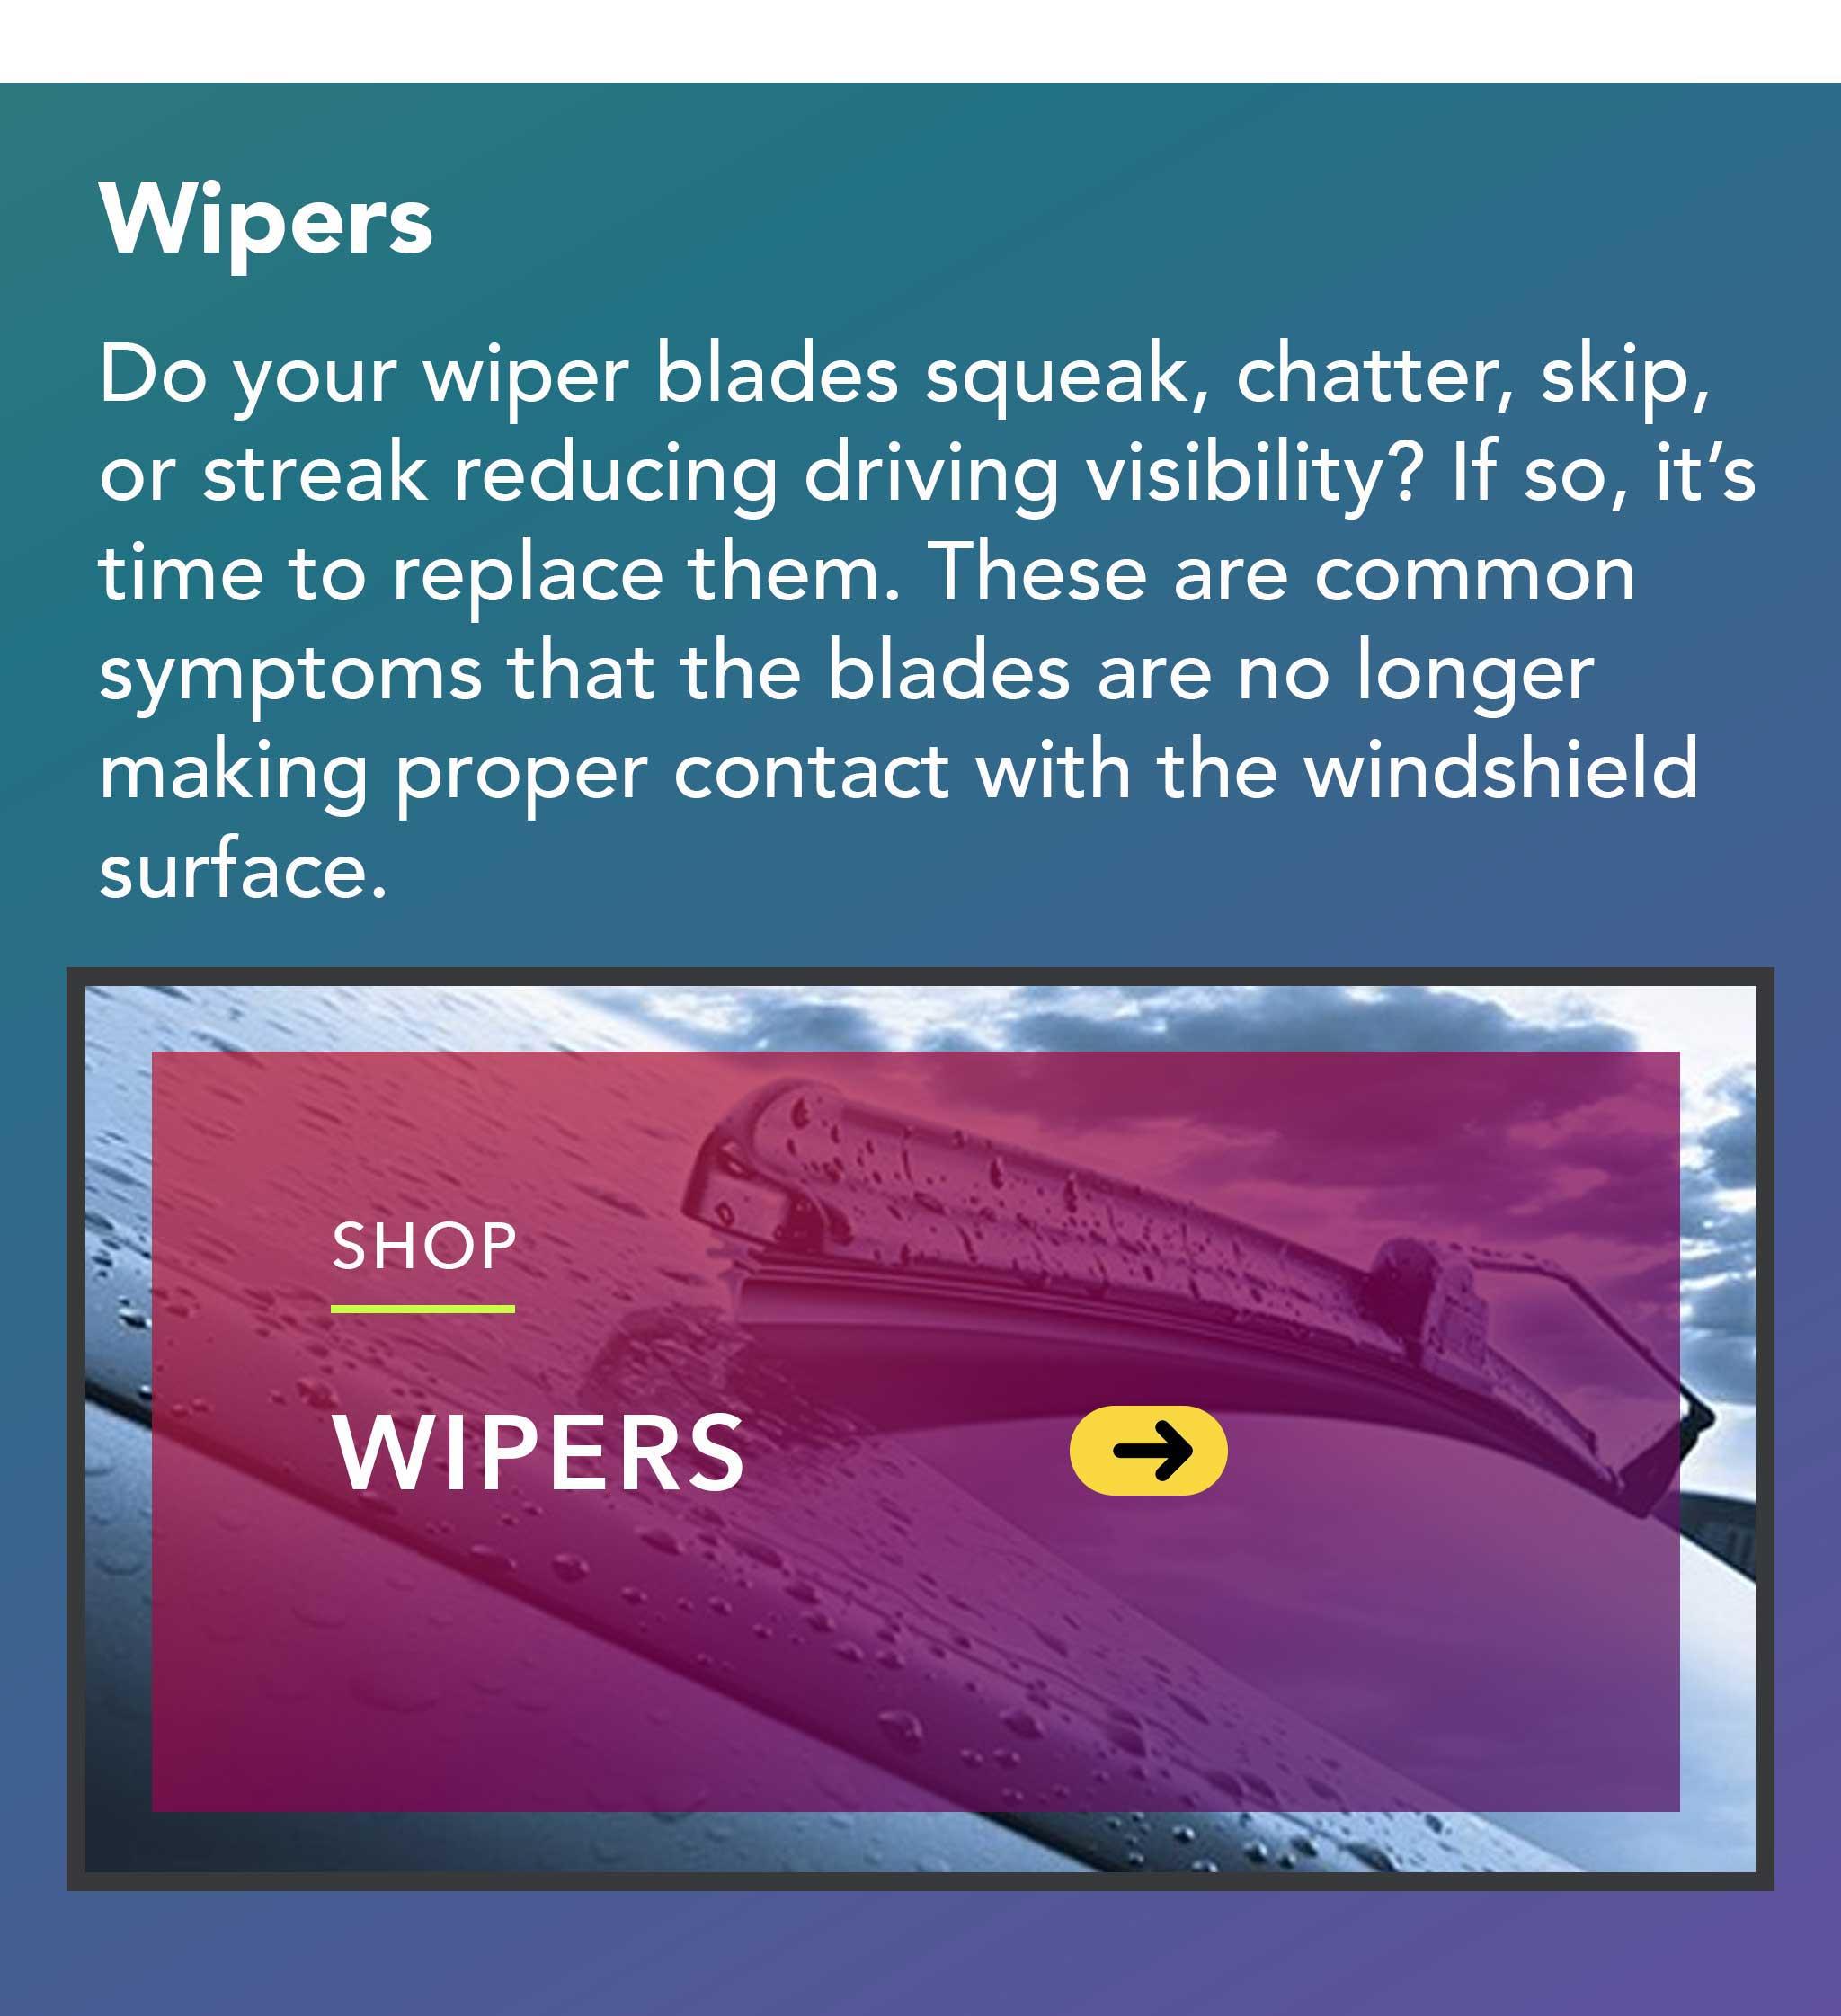 Do your wiper blades squeak, chatter, skip, or streak reducing driving visibility? If so, it’s time to replace them. These are common symptoms that the blades are no longer making proper contact with the windshield surface.